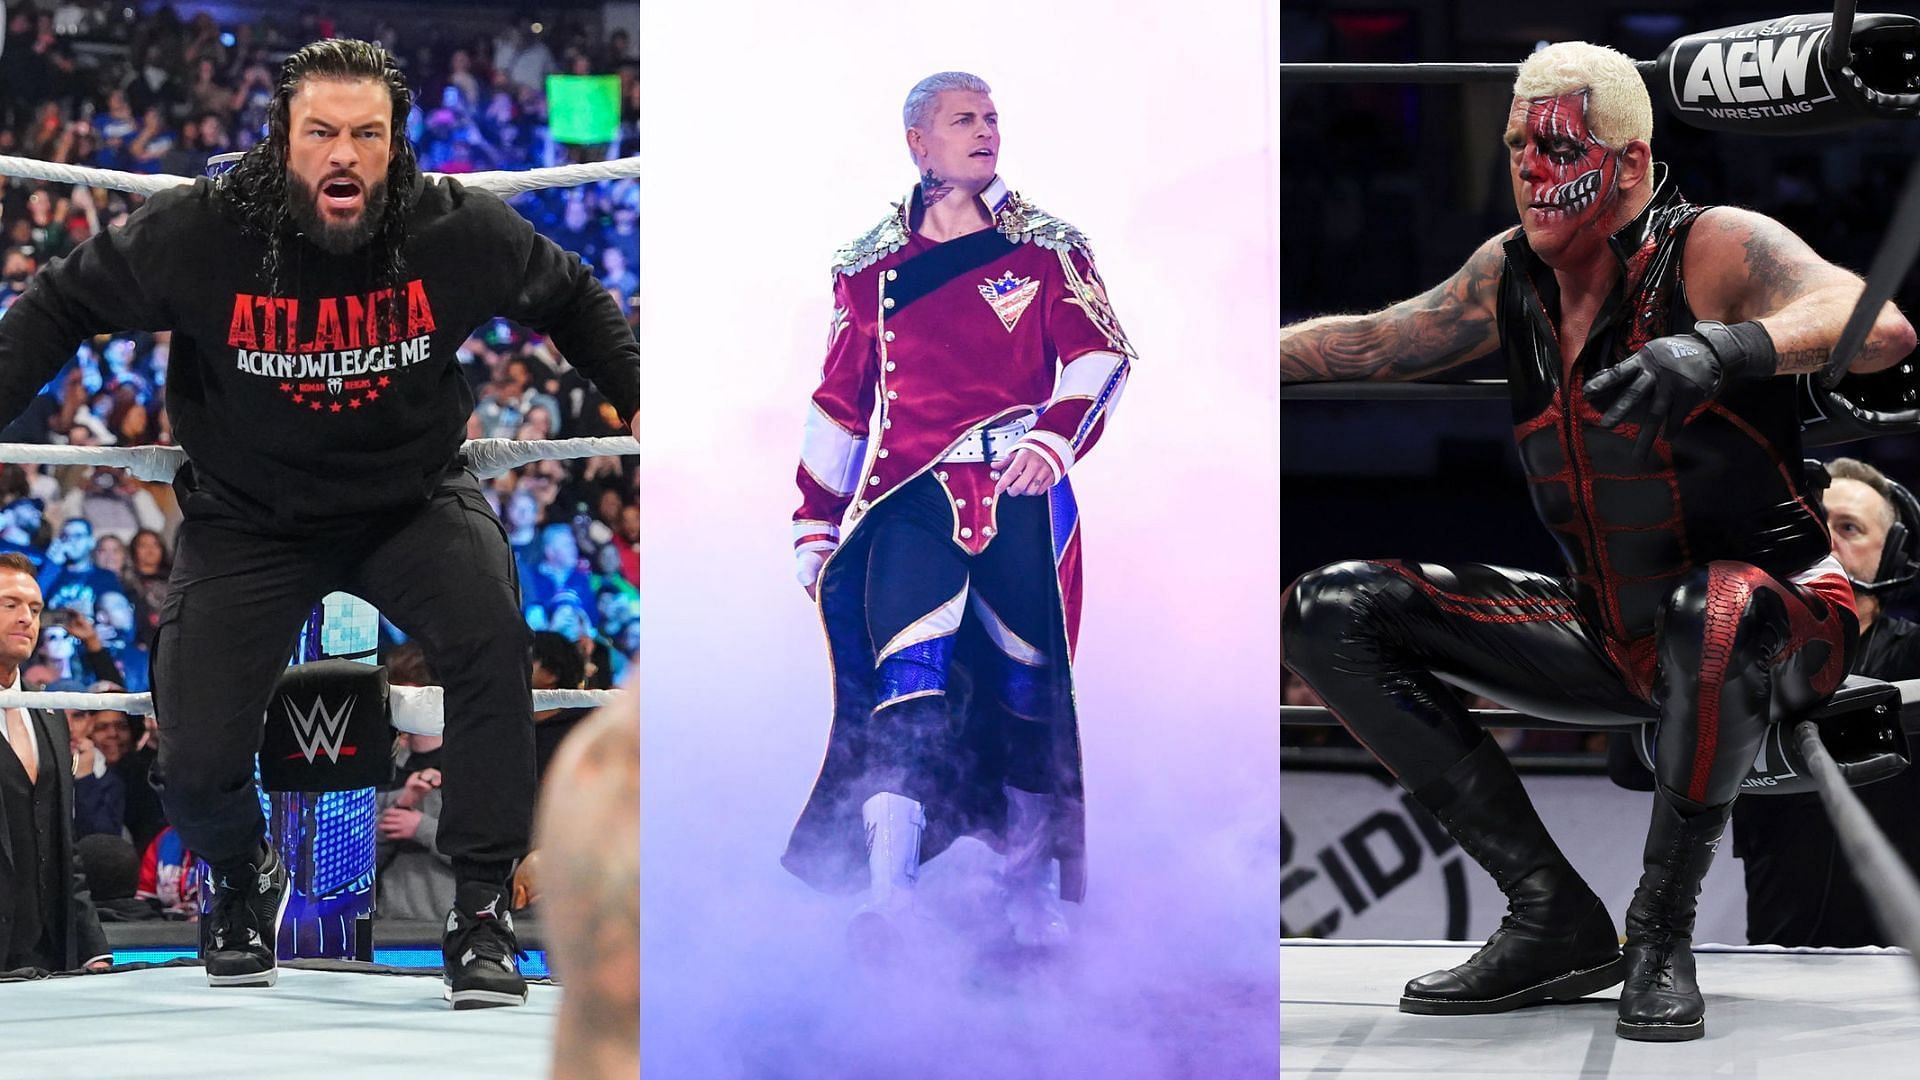 WWE Superstars Roman Reigns and Cody Rhodes with AEW star Dustin Rhodes